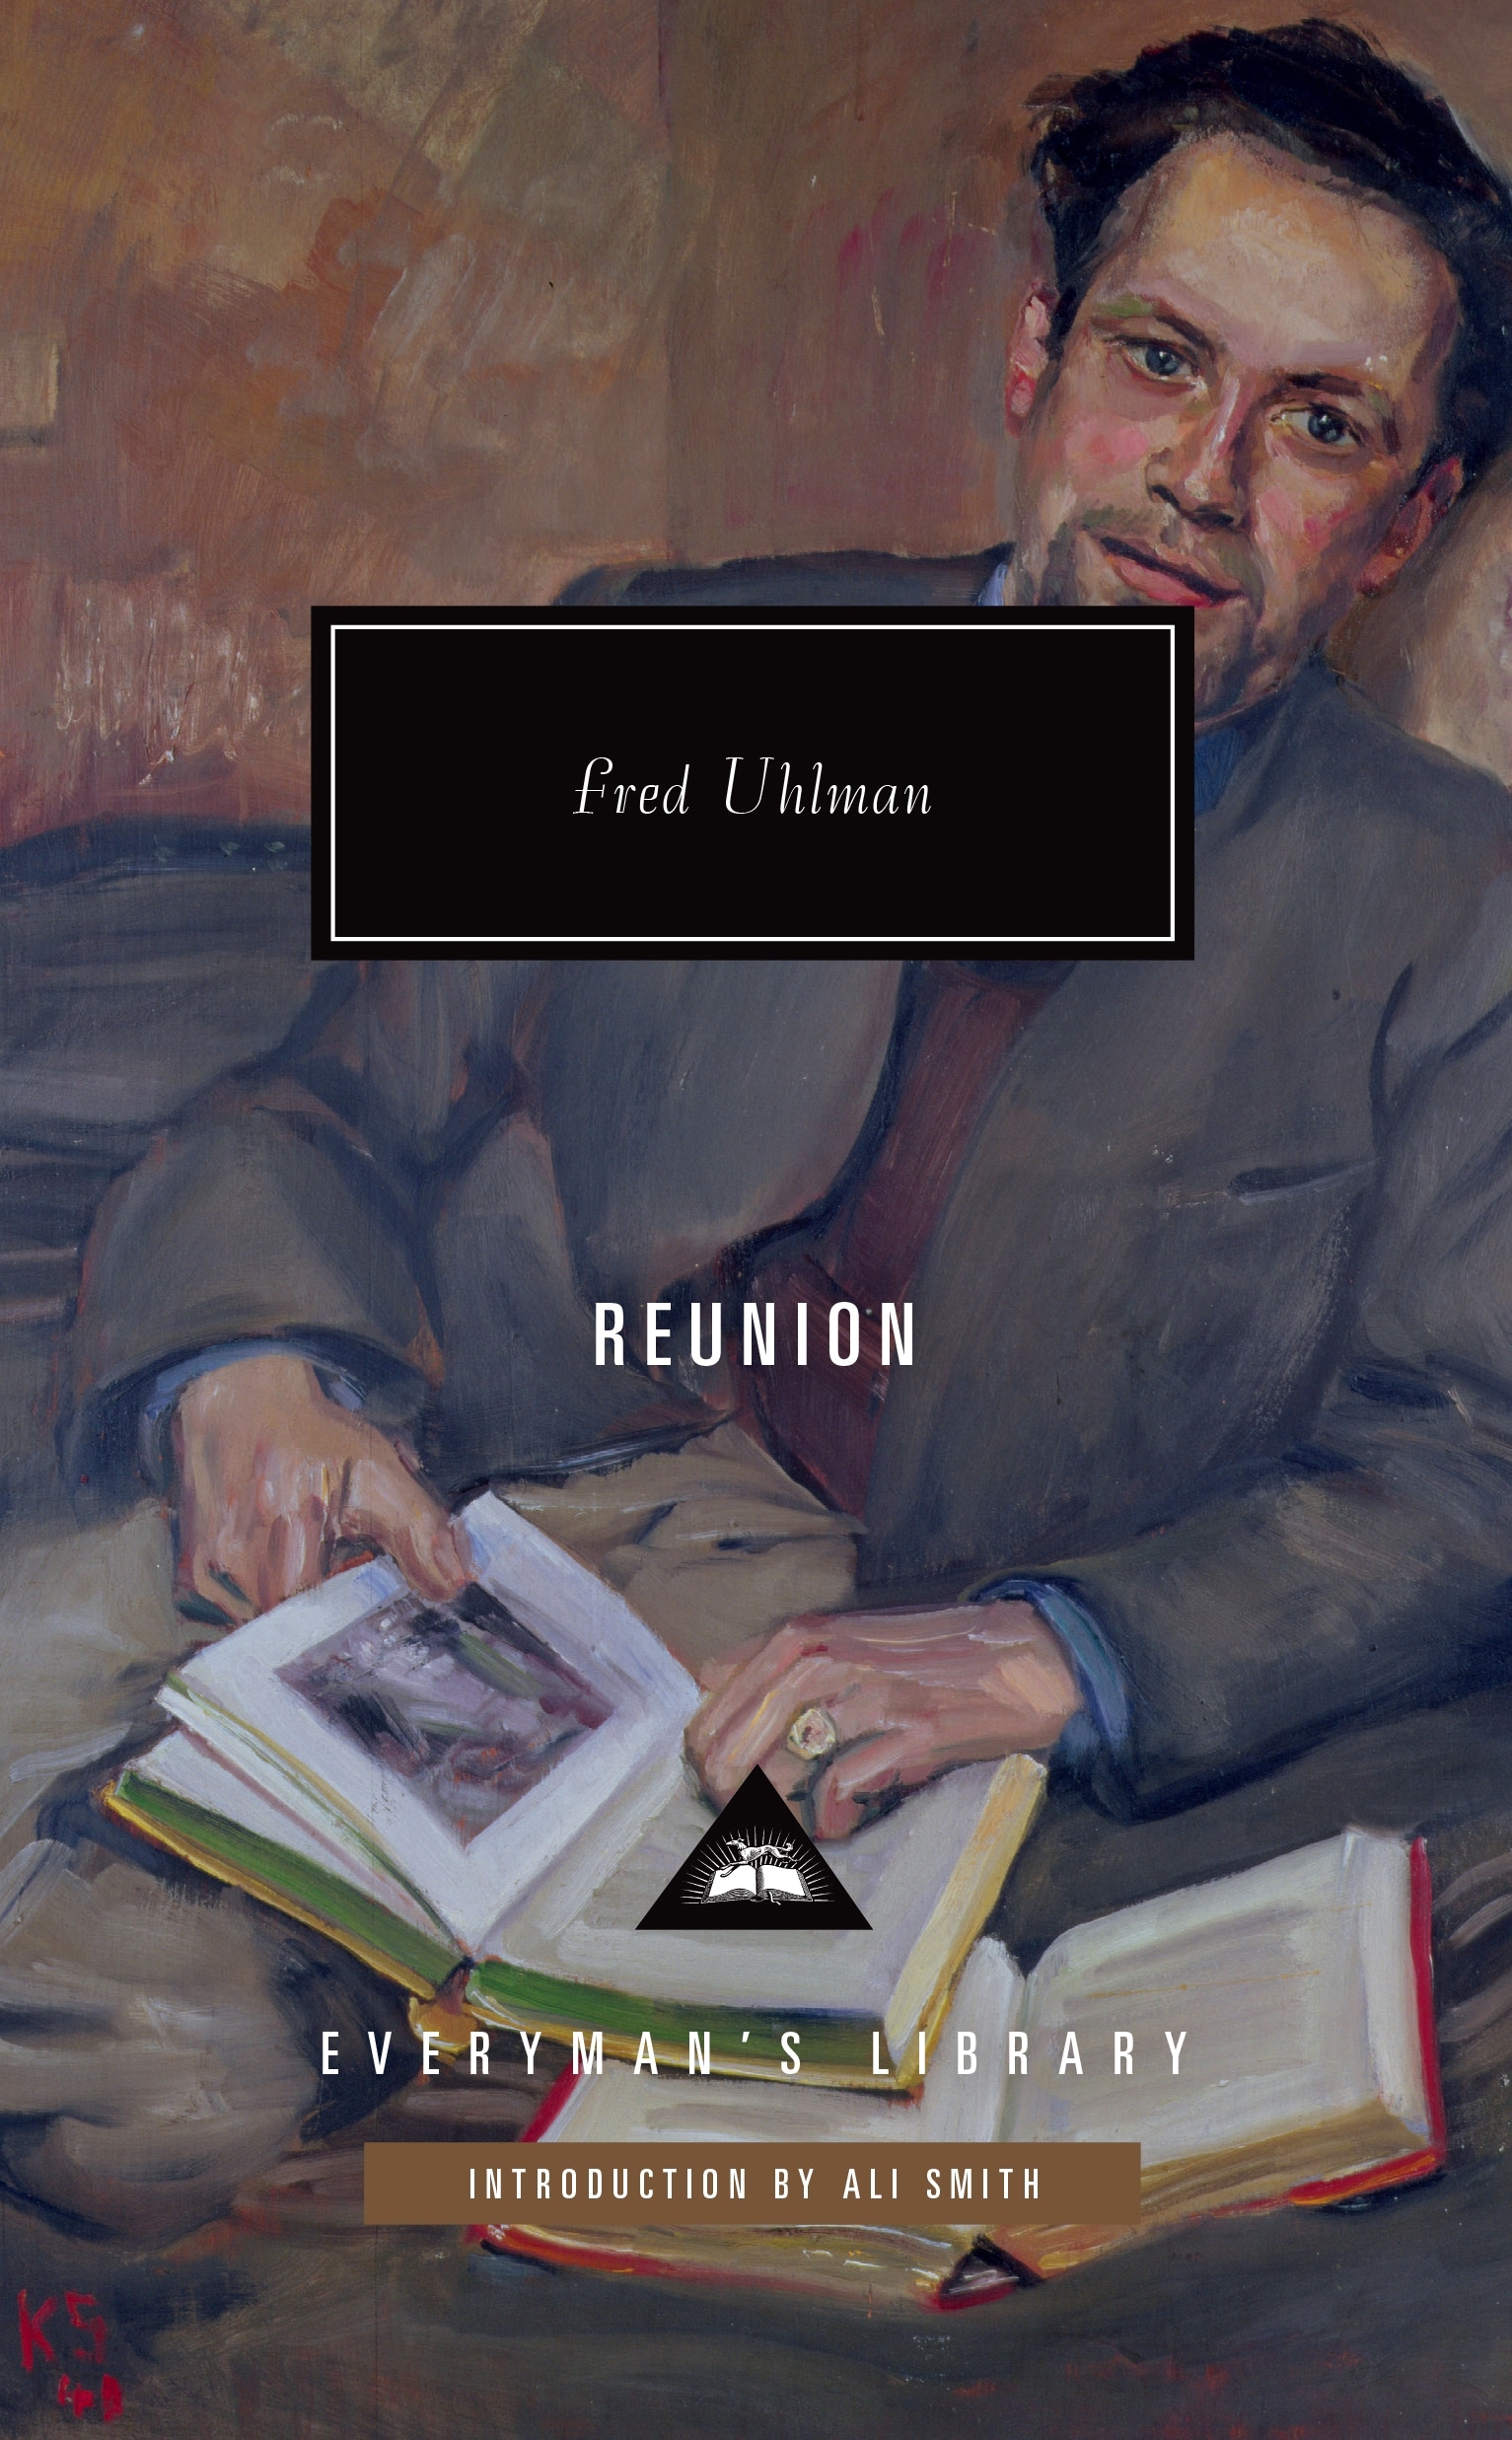 Book “Reunion” by Fred Uhlman, Ali Smith — October 6, 2022